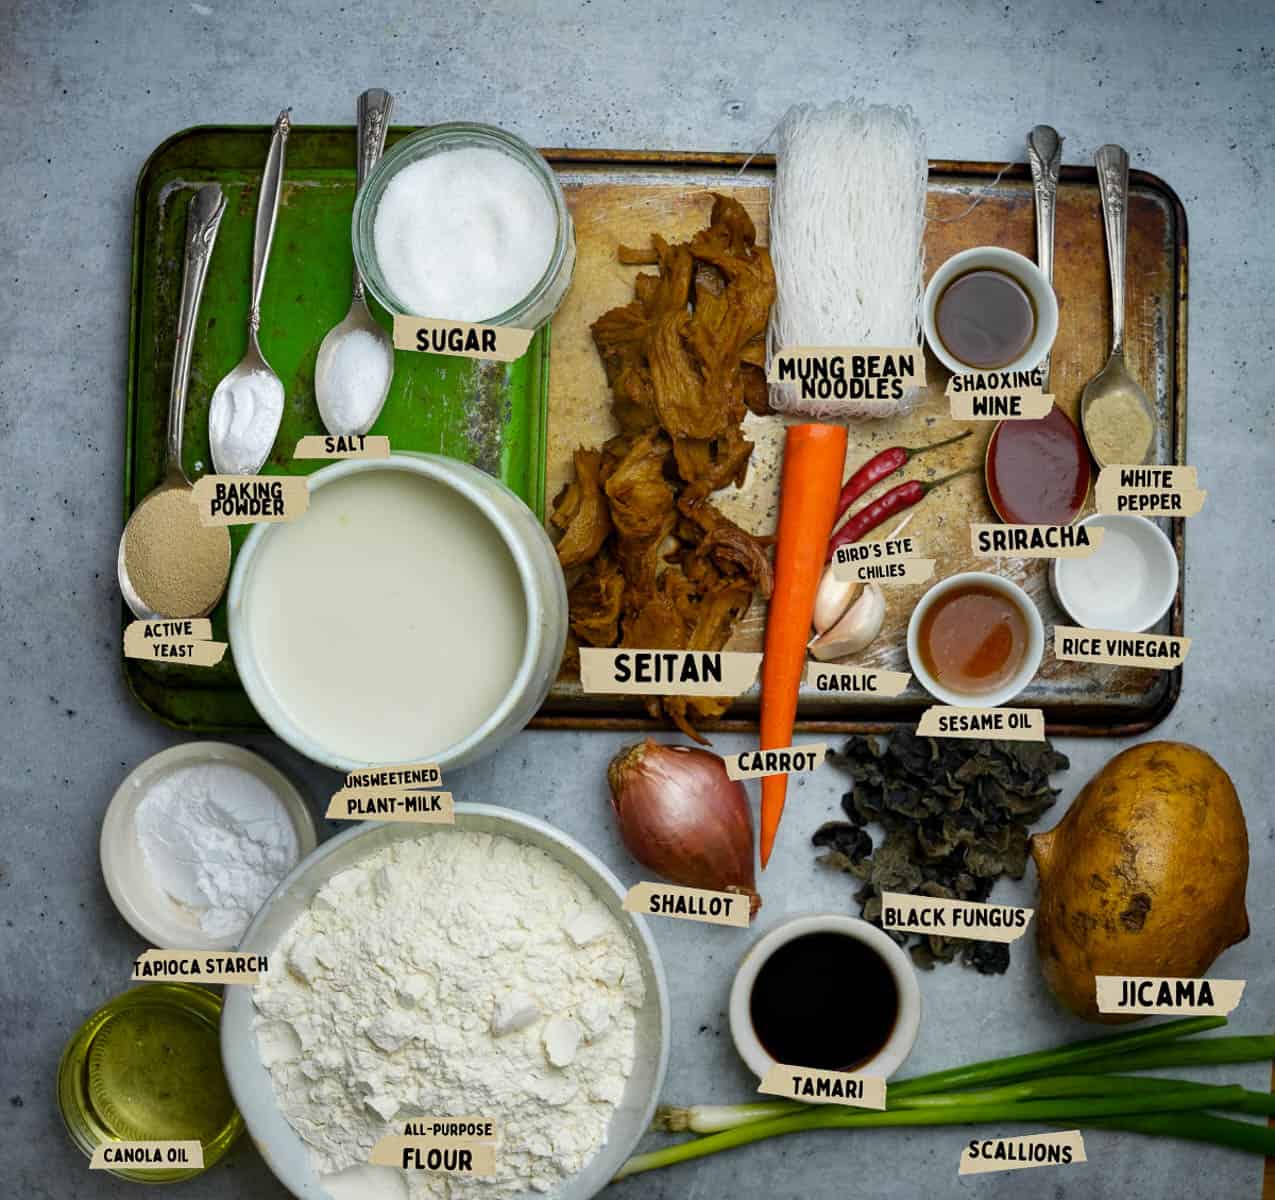 The ingredients for making banh bao are laid out on a table.